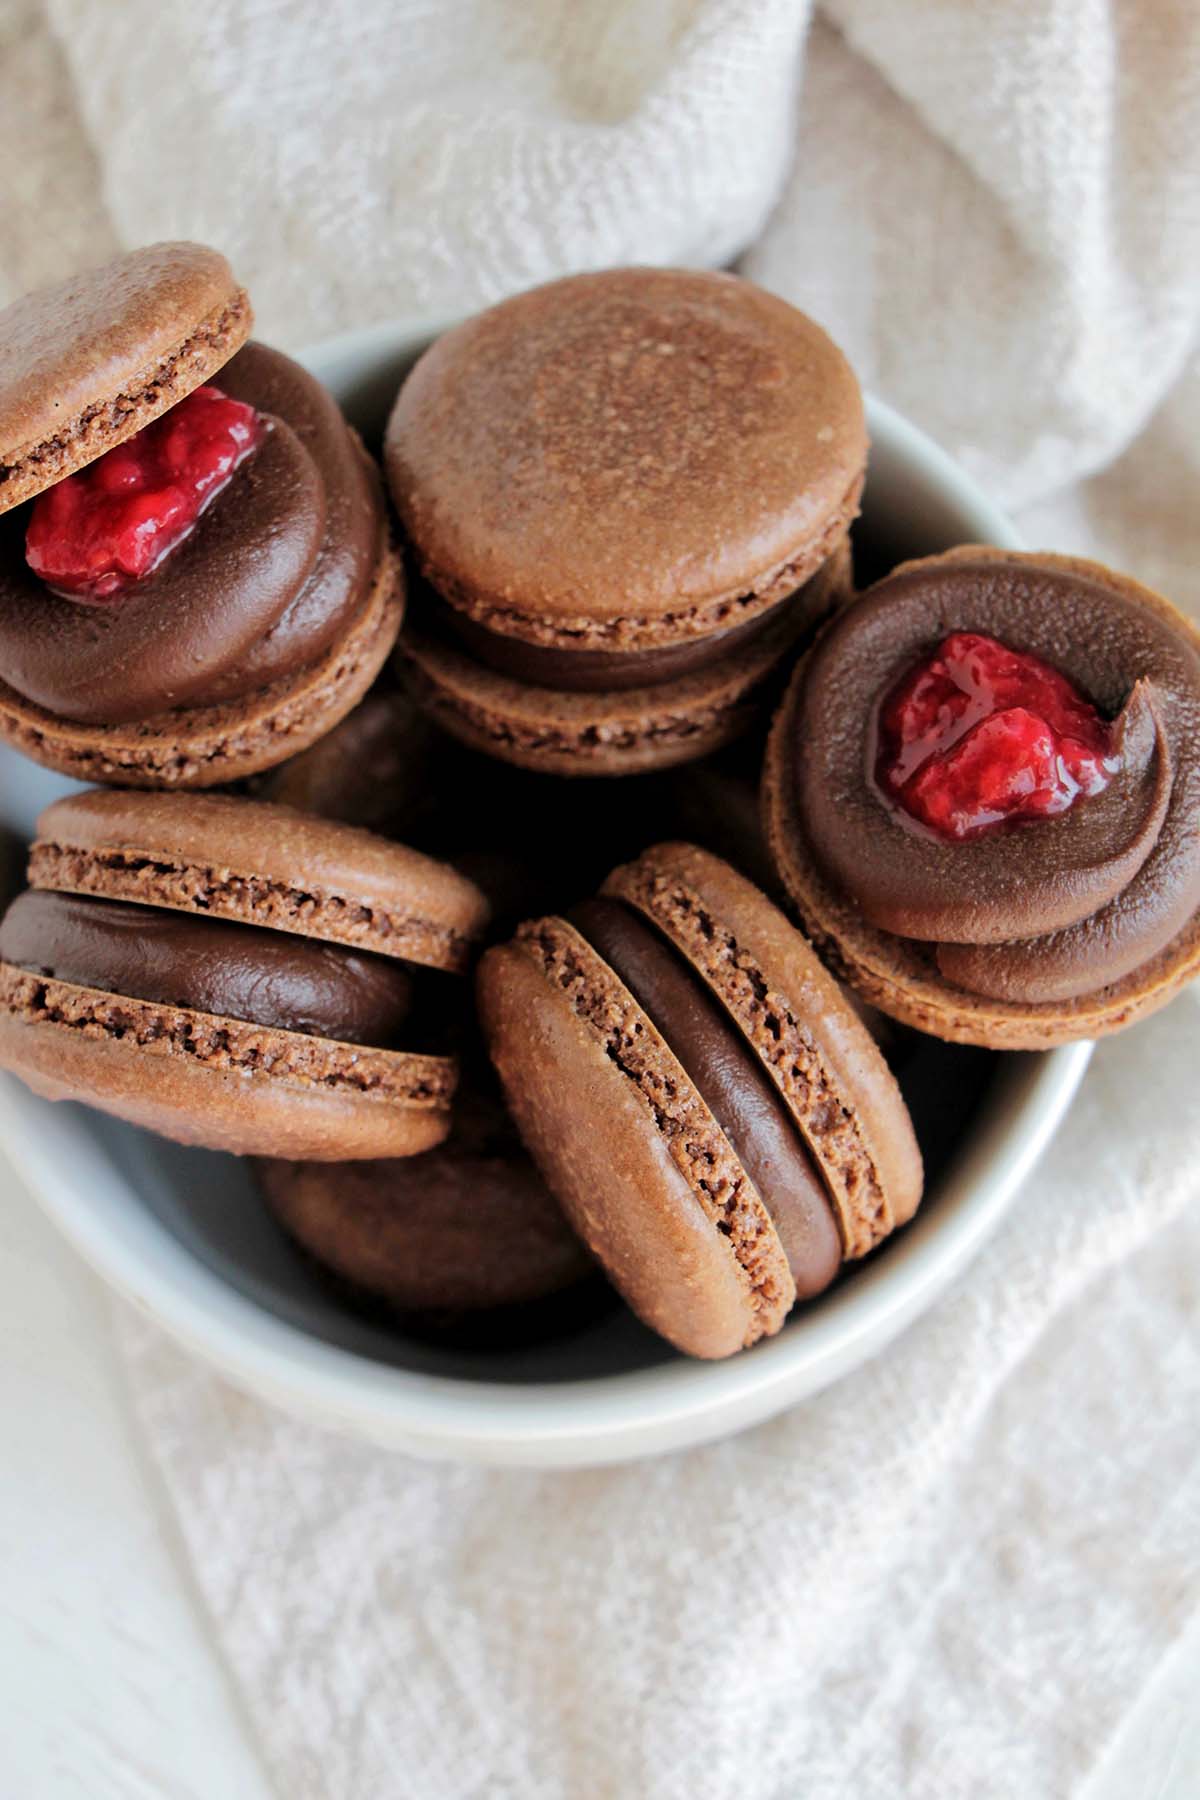 chocolate macarons filled with chocolate ganache and raspberry compote.